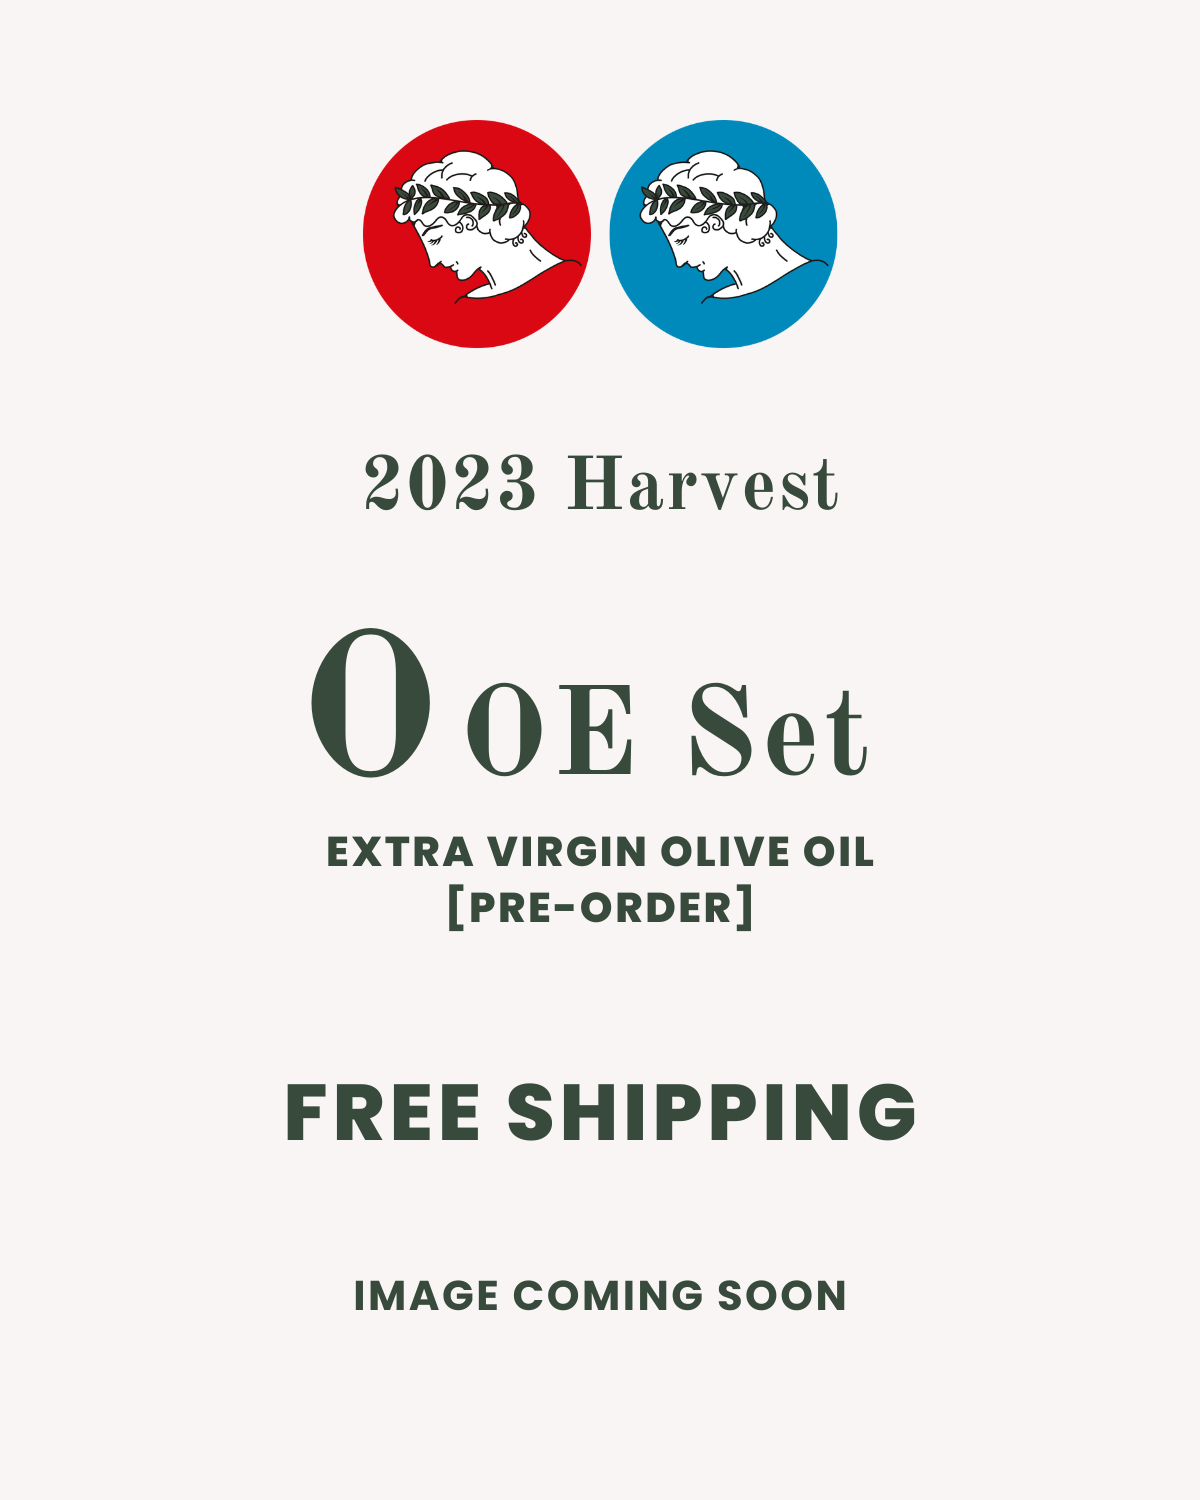 2023 Harvest The Olive Oil Enthusiast Set (Pre-Order + Free Shipping) - 2 bottles & 1 book